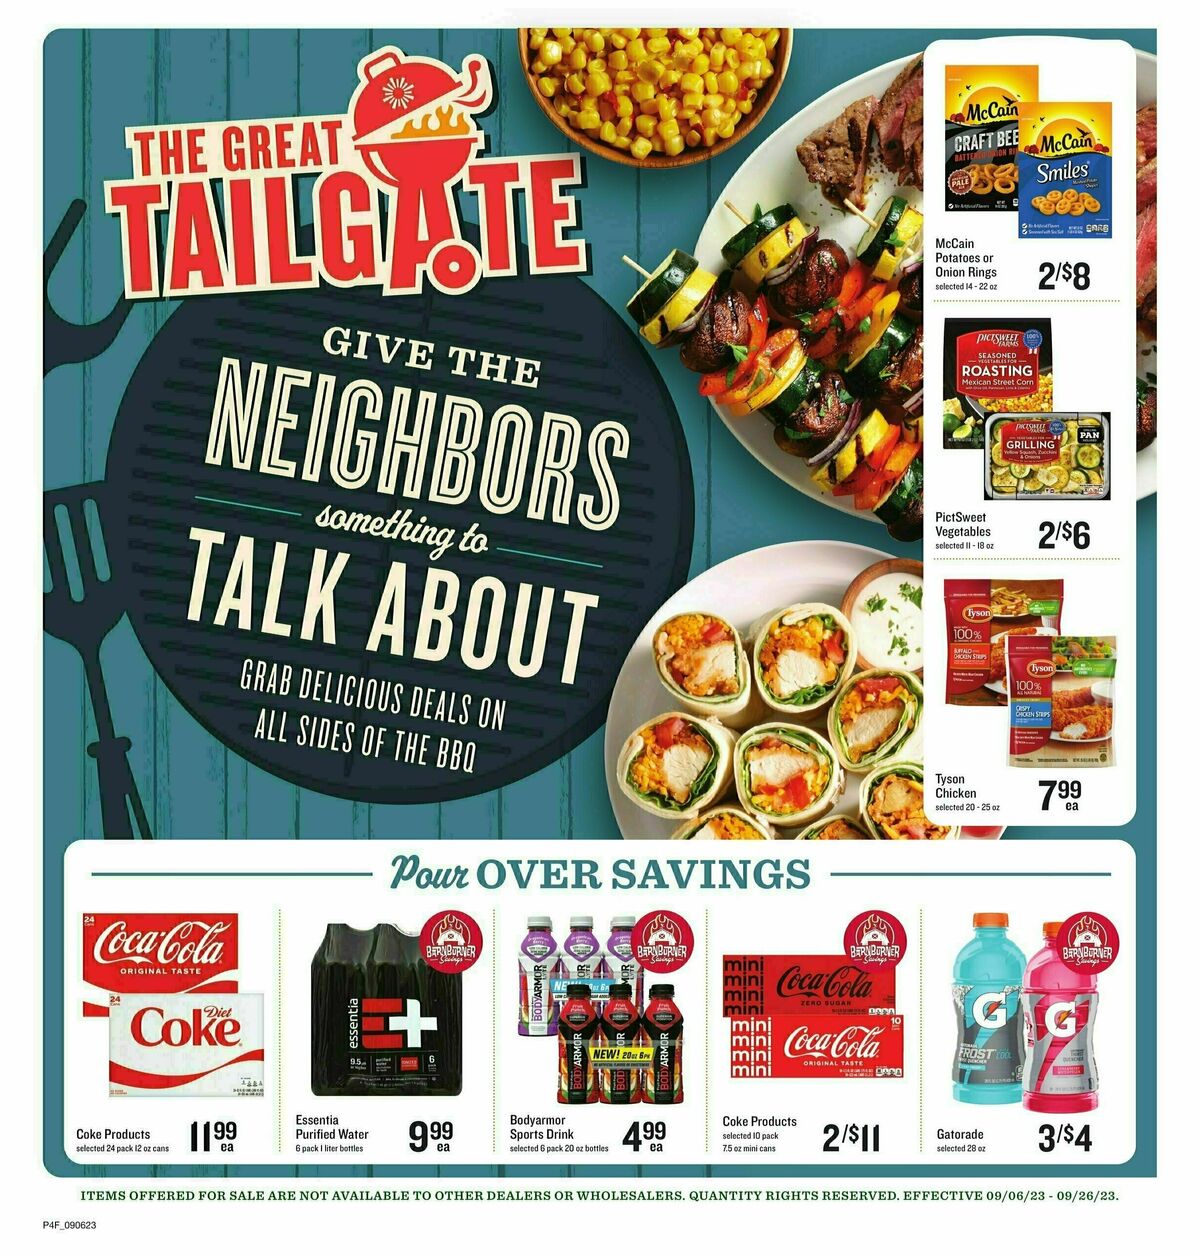 Lowes Foods Tailgating Weekly Ad from September 6